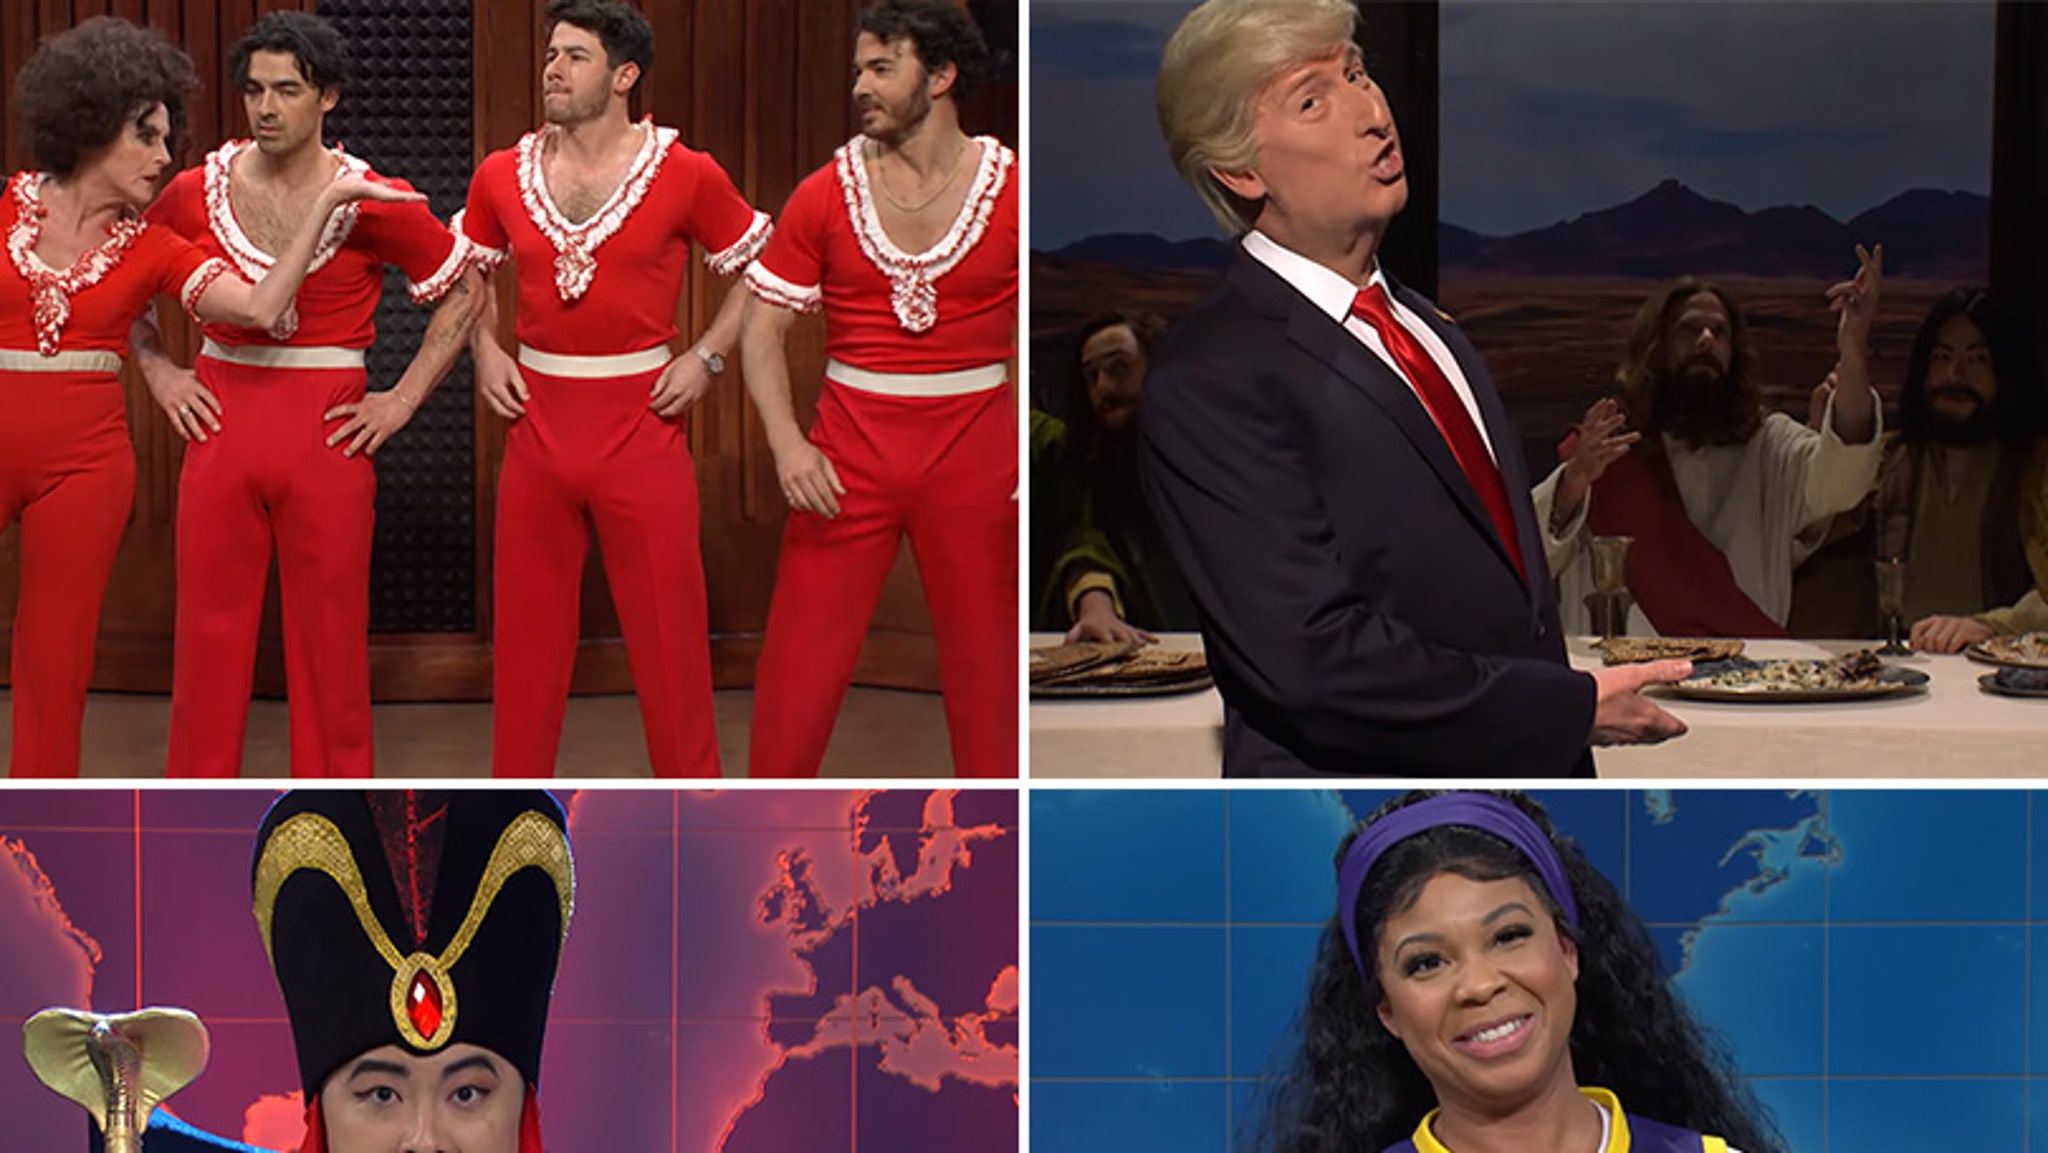 Molly Shannon SNL Sketches Ranked: Trump Compares Himself to Jesus, Molly's Classic Characters